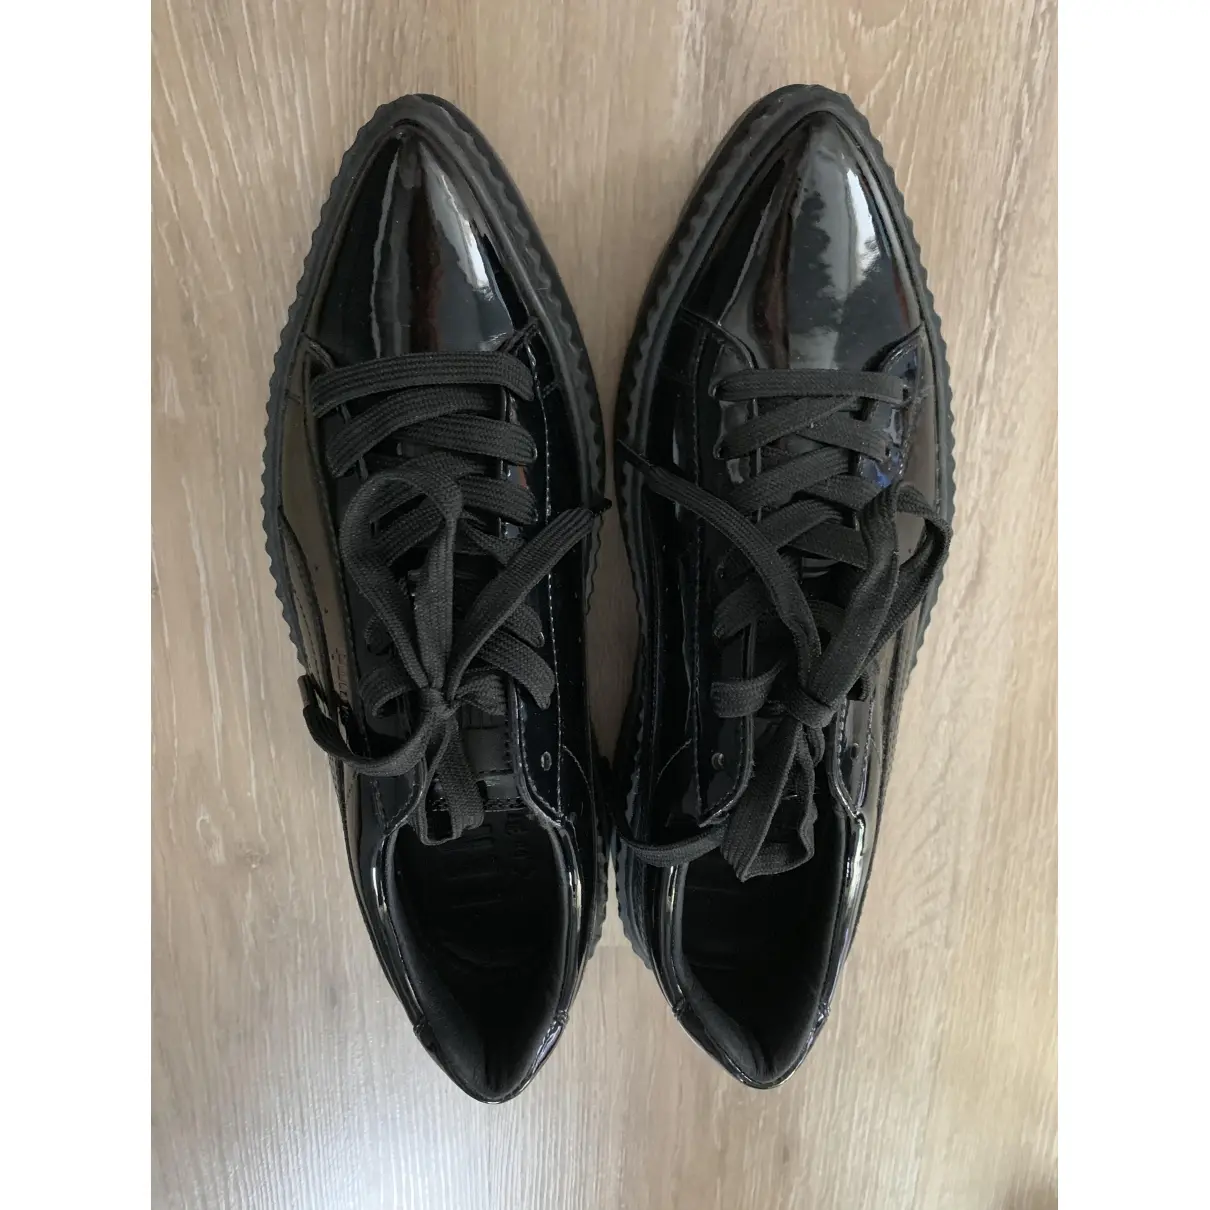 Fenty x Puma Patent leather trainers for sale